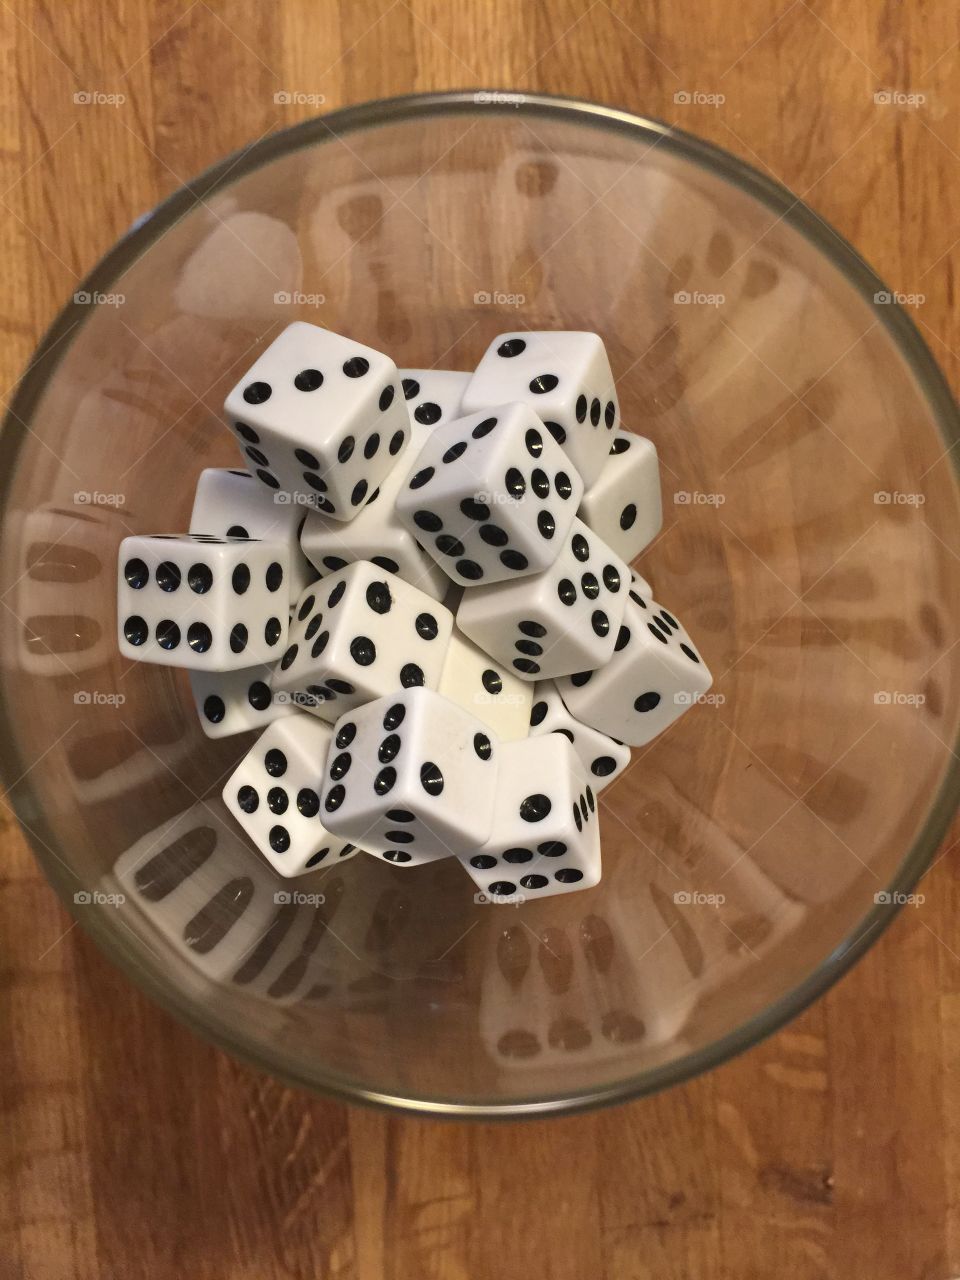 Dice in a wine glass with reflection form the dice